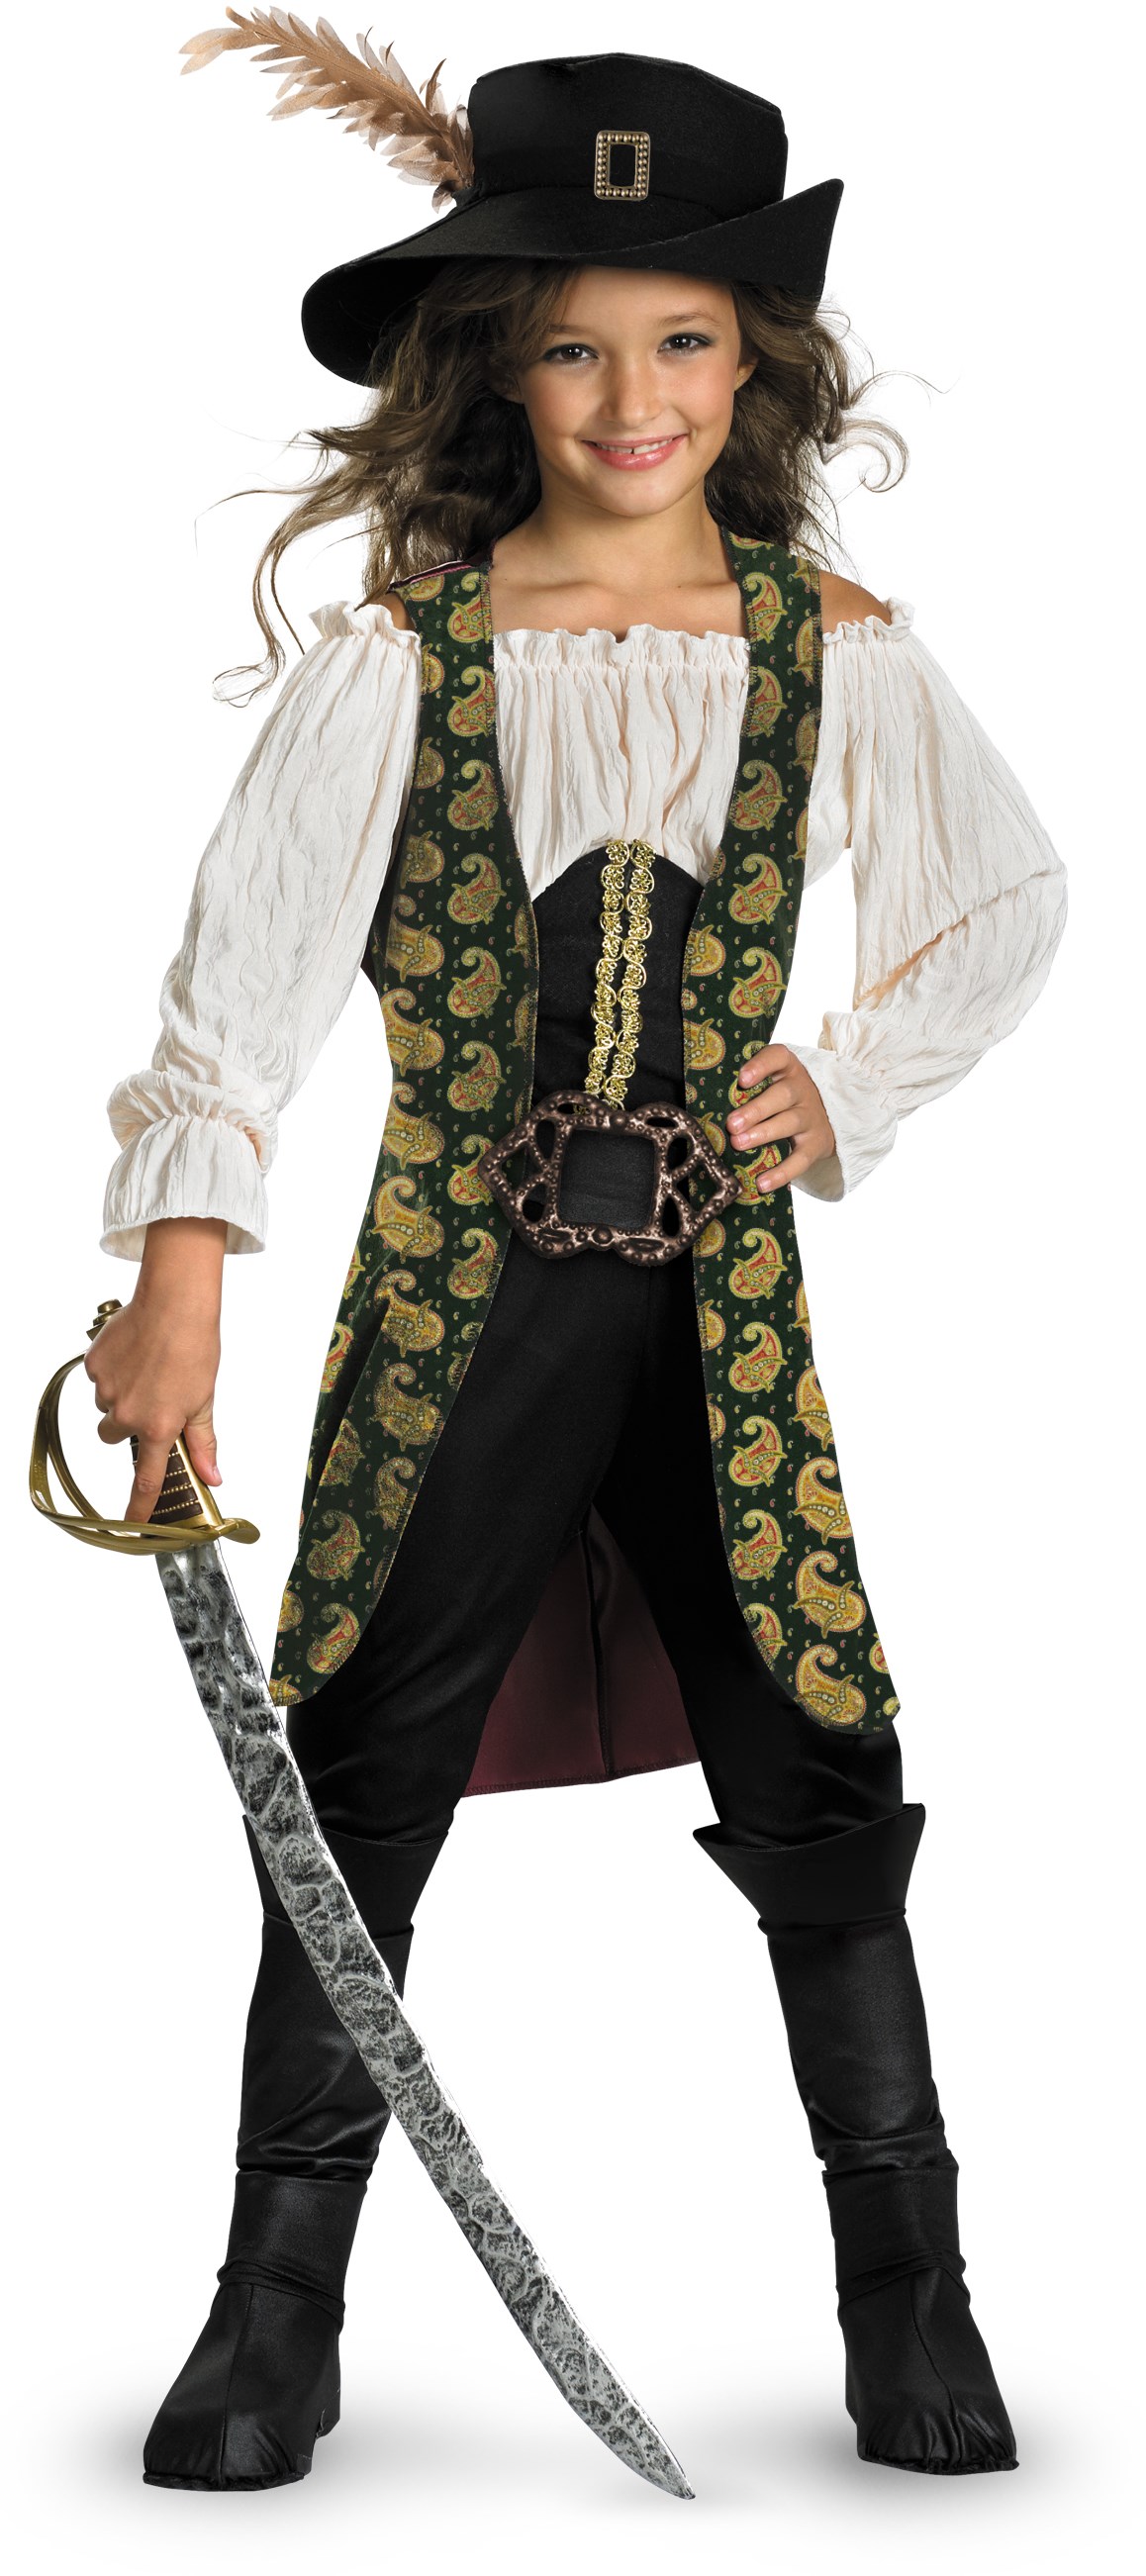 Pirates of the Caribbean 4 On Stranger Tides - Angelica Deluxe Child Costume